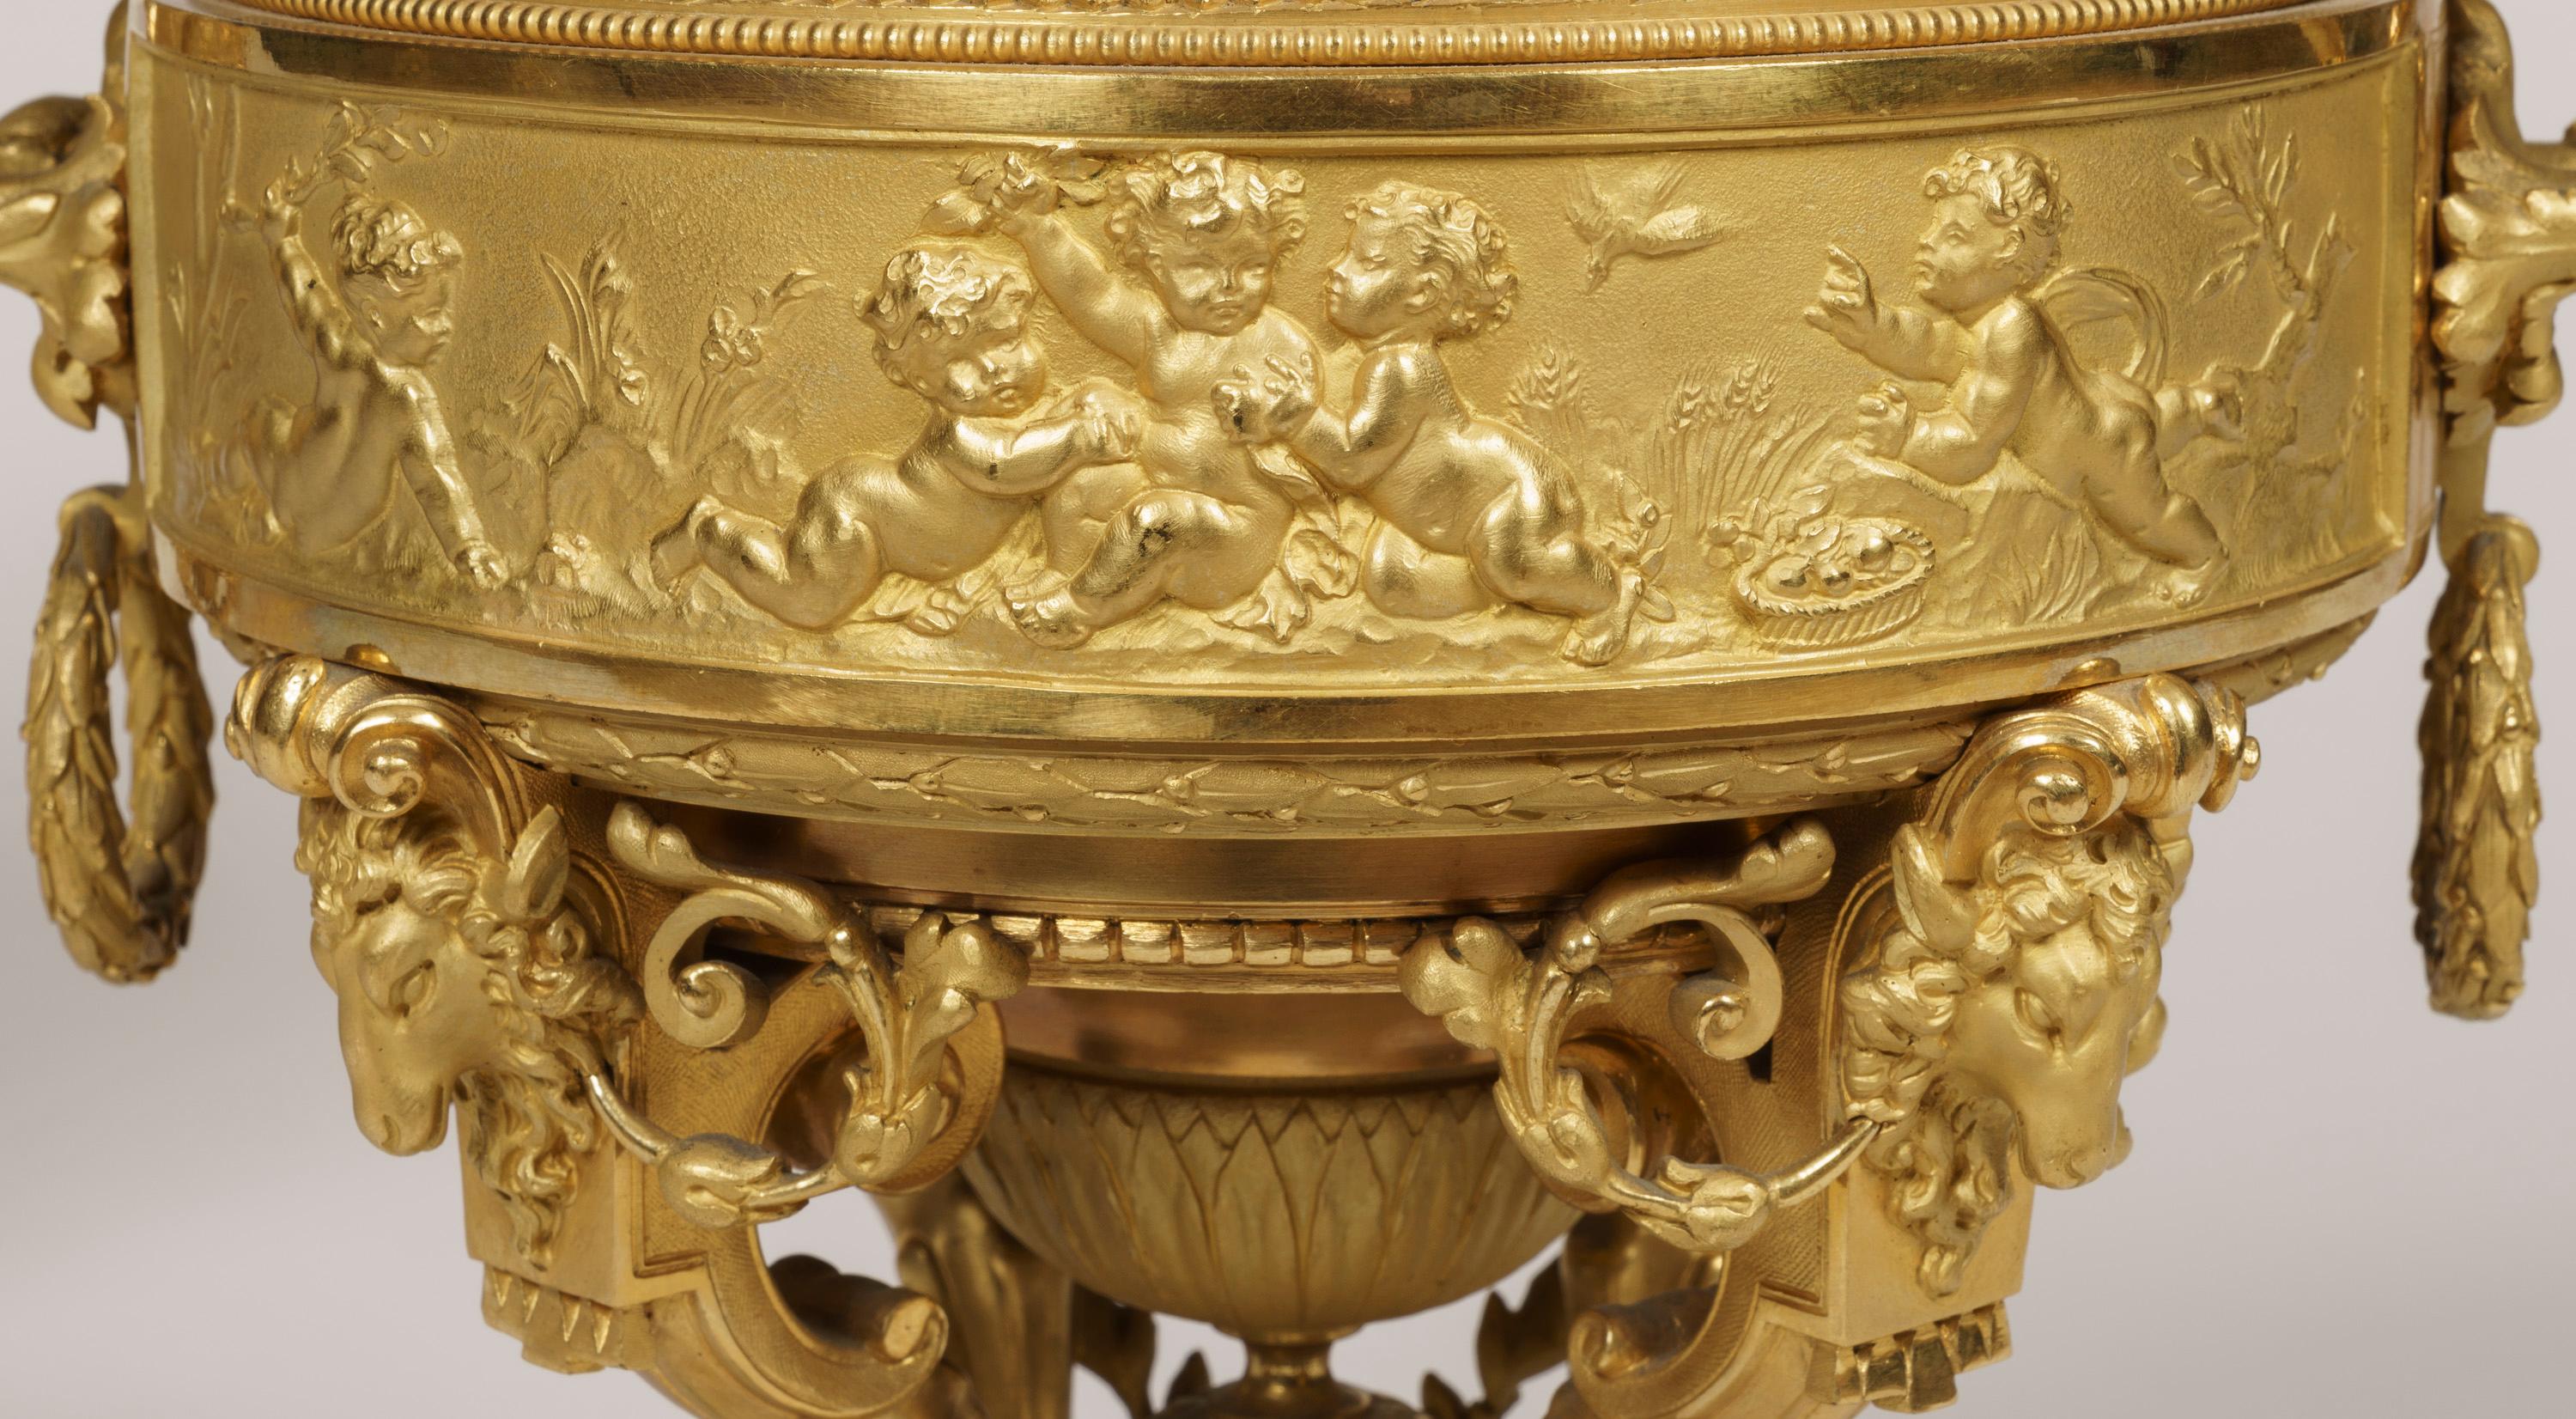 A pair of French Bonbonnières in ormolu in the Louis XIV manner

Constructed in ormolu of exceptional colour and casting, rising from four swept and scrolled legs conjoined by incurved stretchers set with finials, the baluster form bodies having a